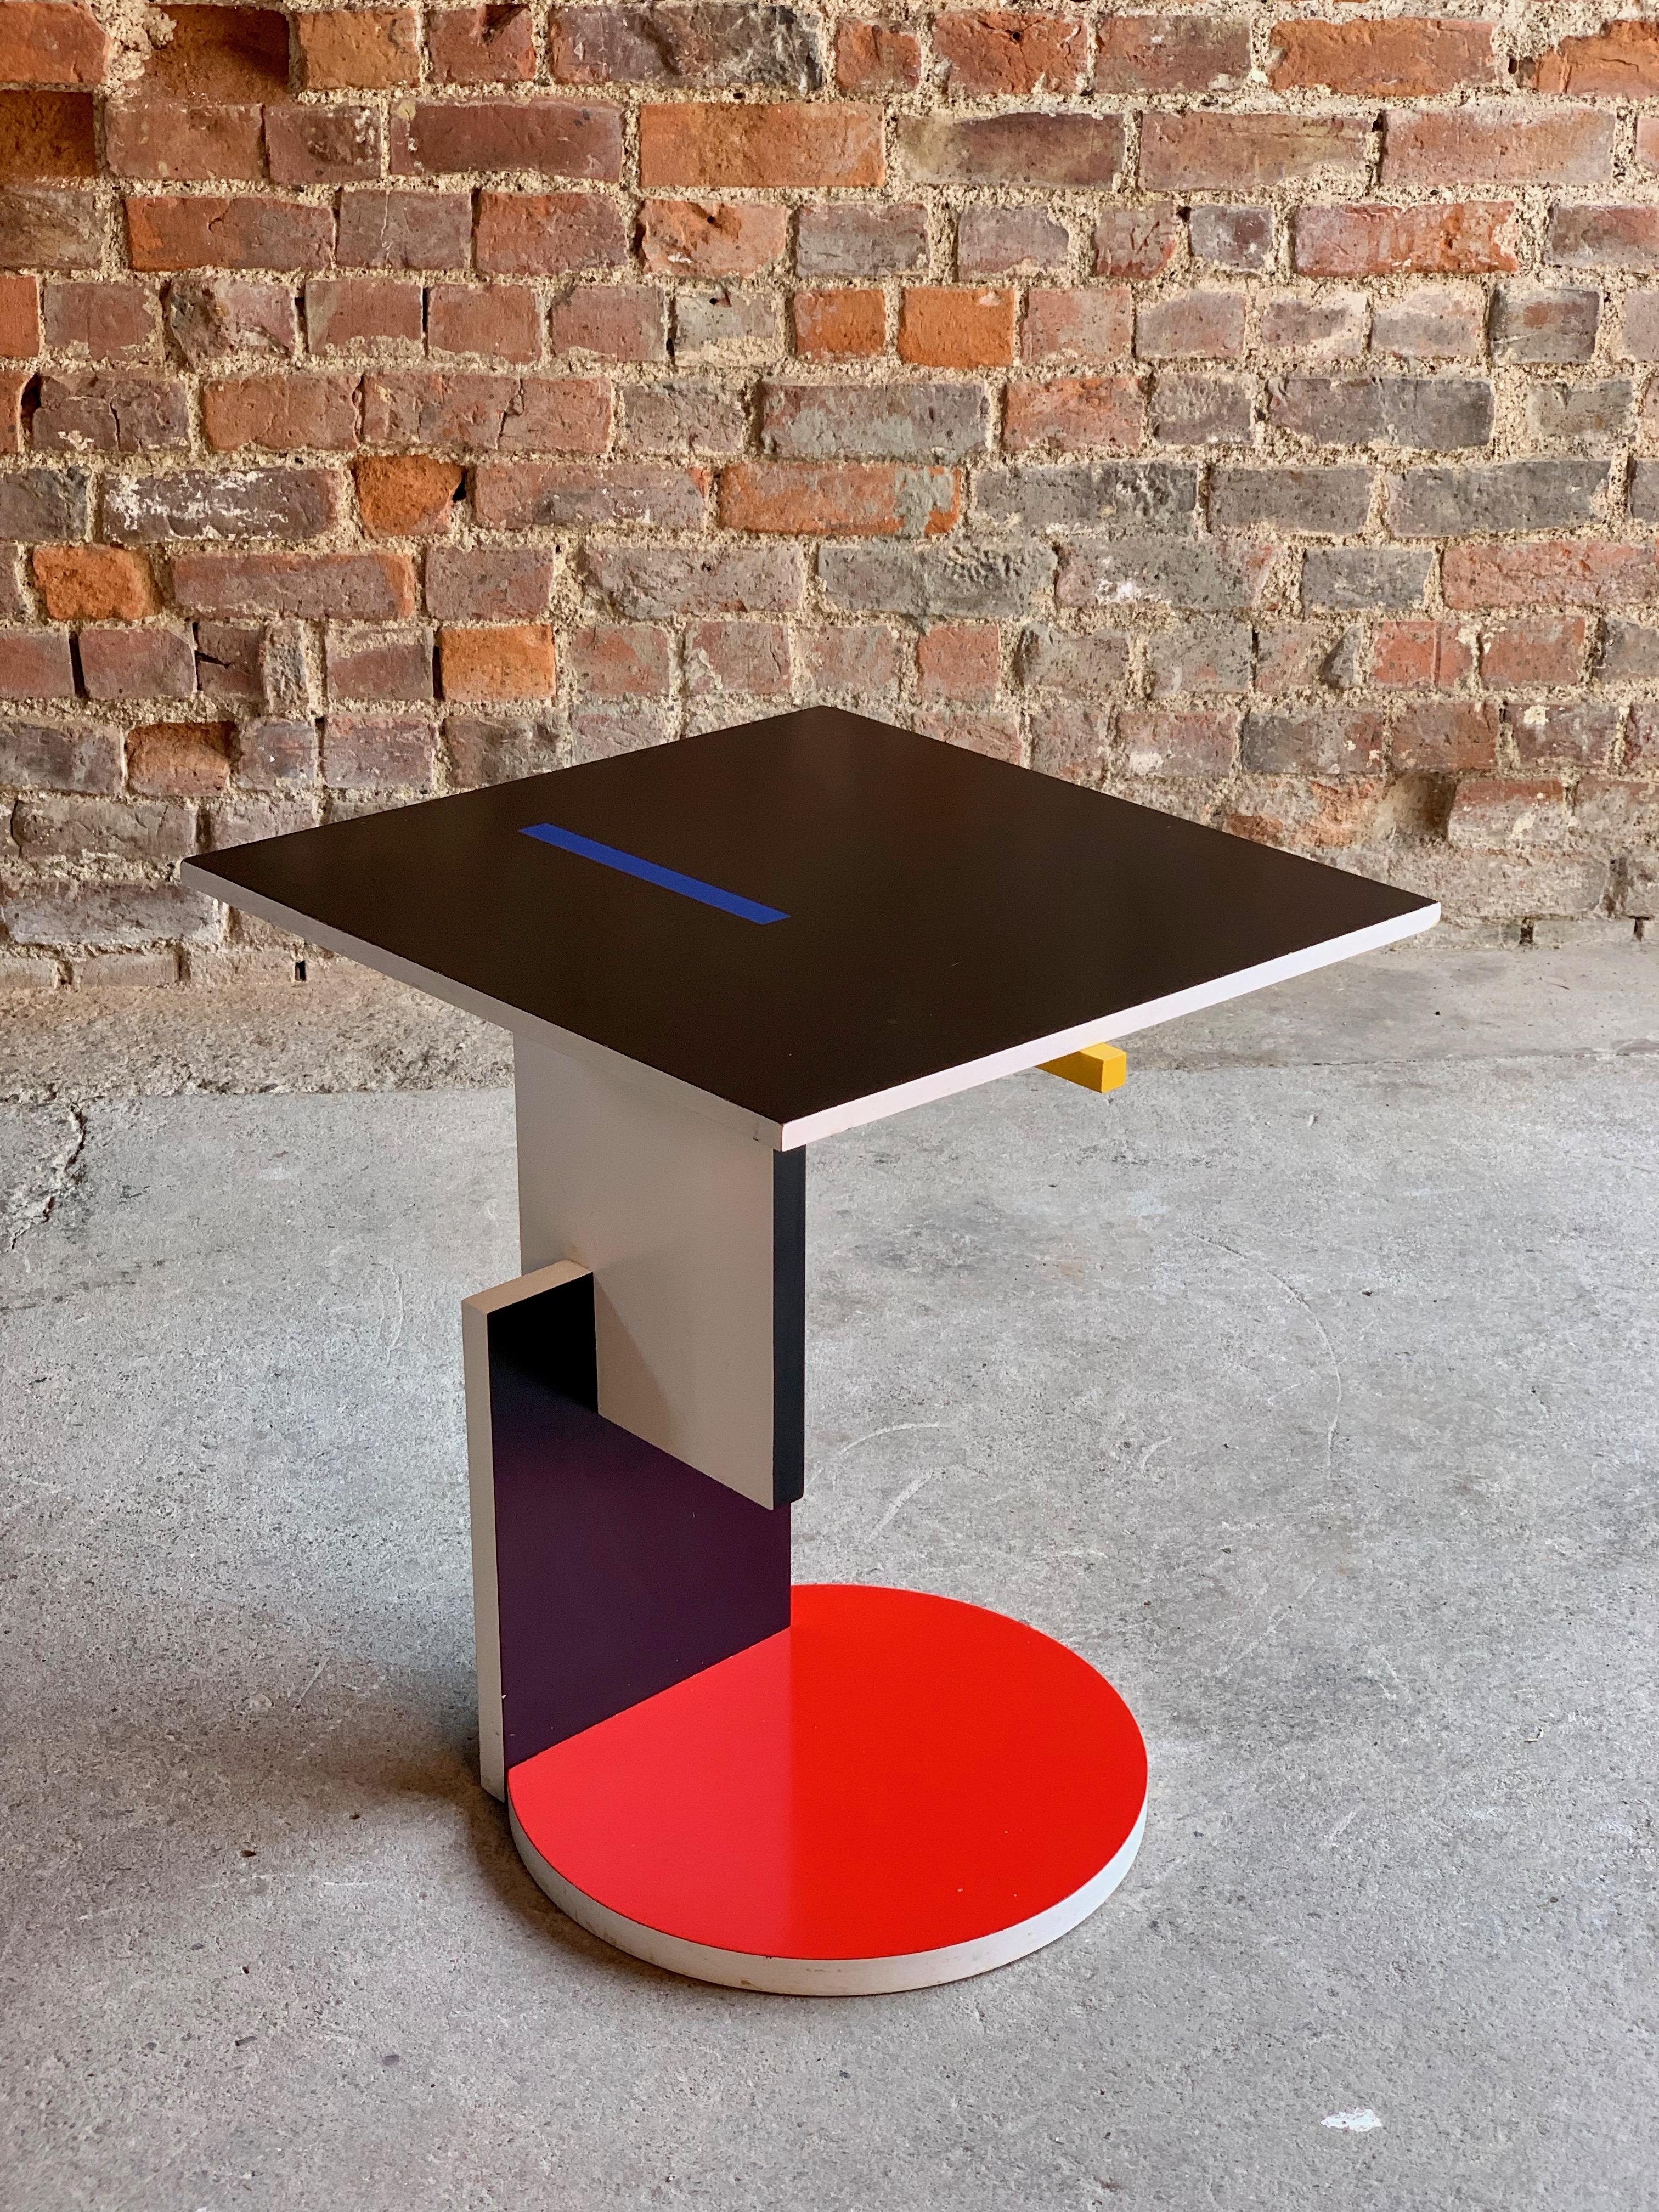 Schroeder 1 side table designed by Gerrit Rietveld by Cassina Italy, circa 1980.

Designed in 1922-23 for the eponymous house in Utrecht, Rietveld continues the De Stijl theme of the Red Blue Chair with this side table. Made from beechwood with